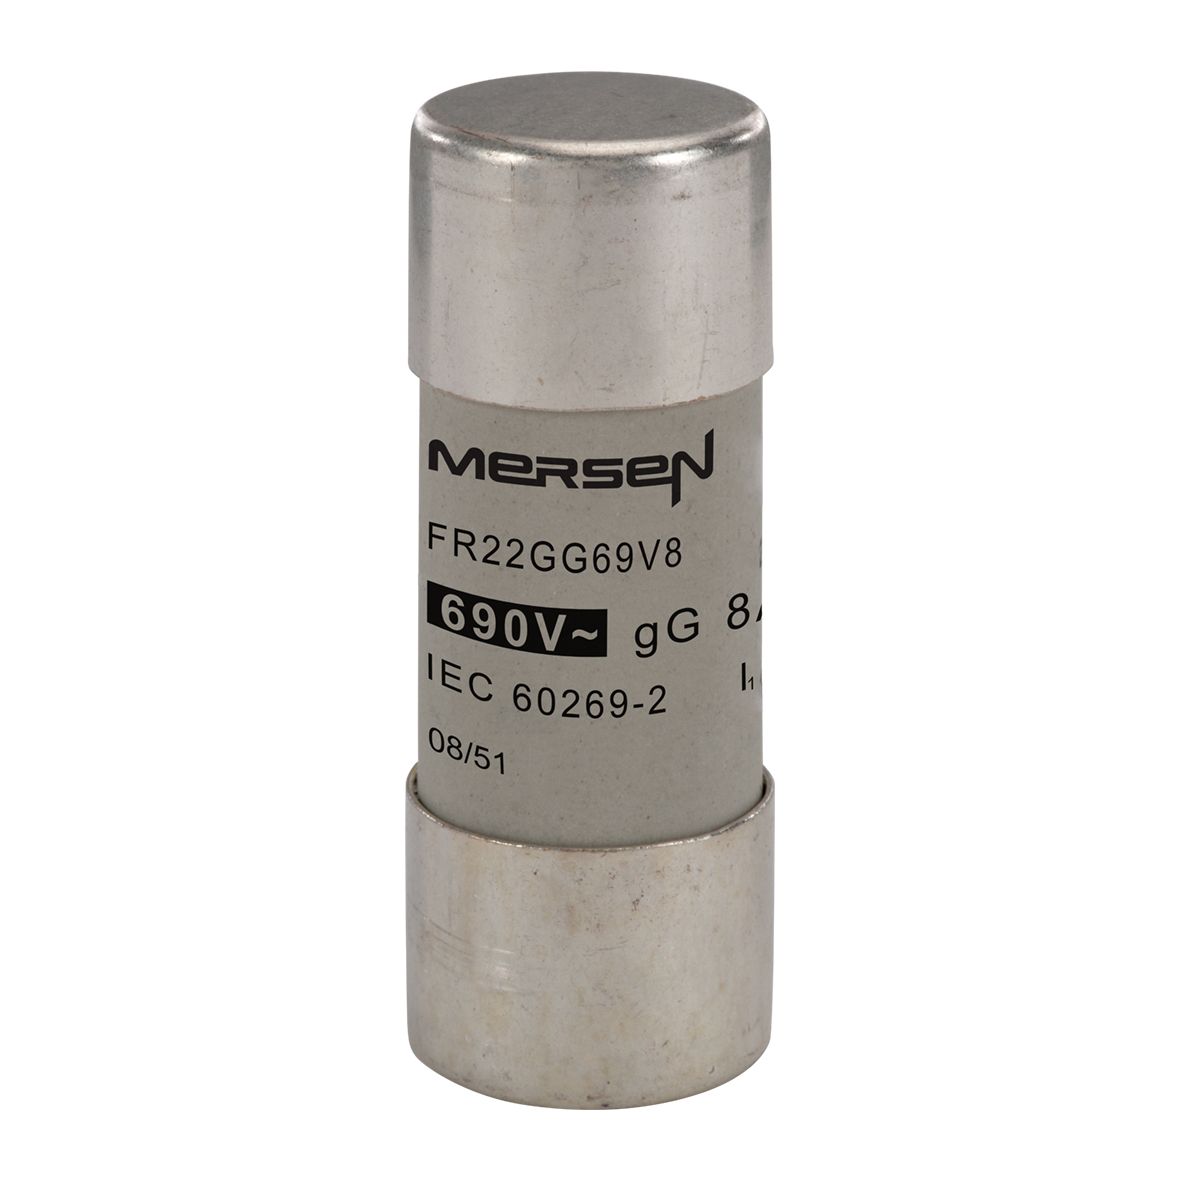 L222972 - Cylindrical fuse-link gG 690VAC 22.2x58, 8A